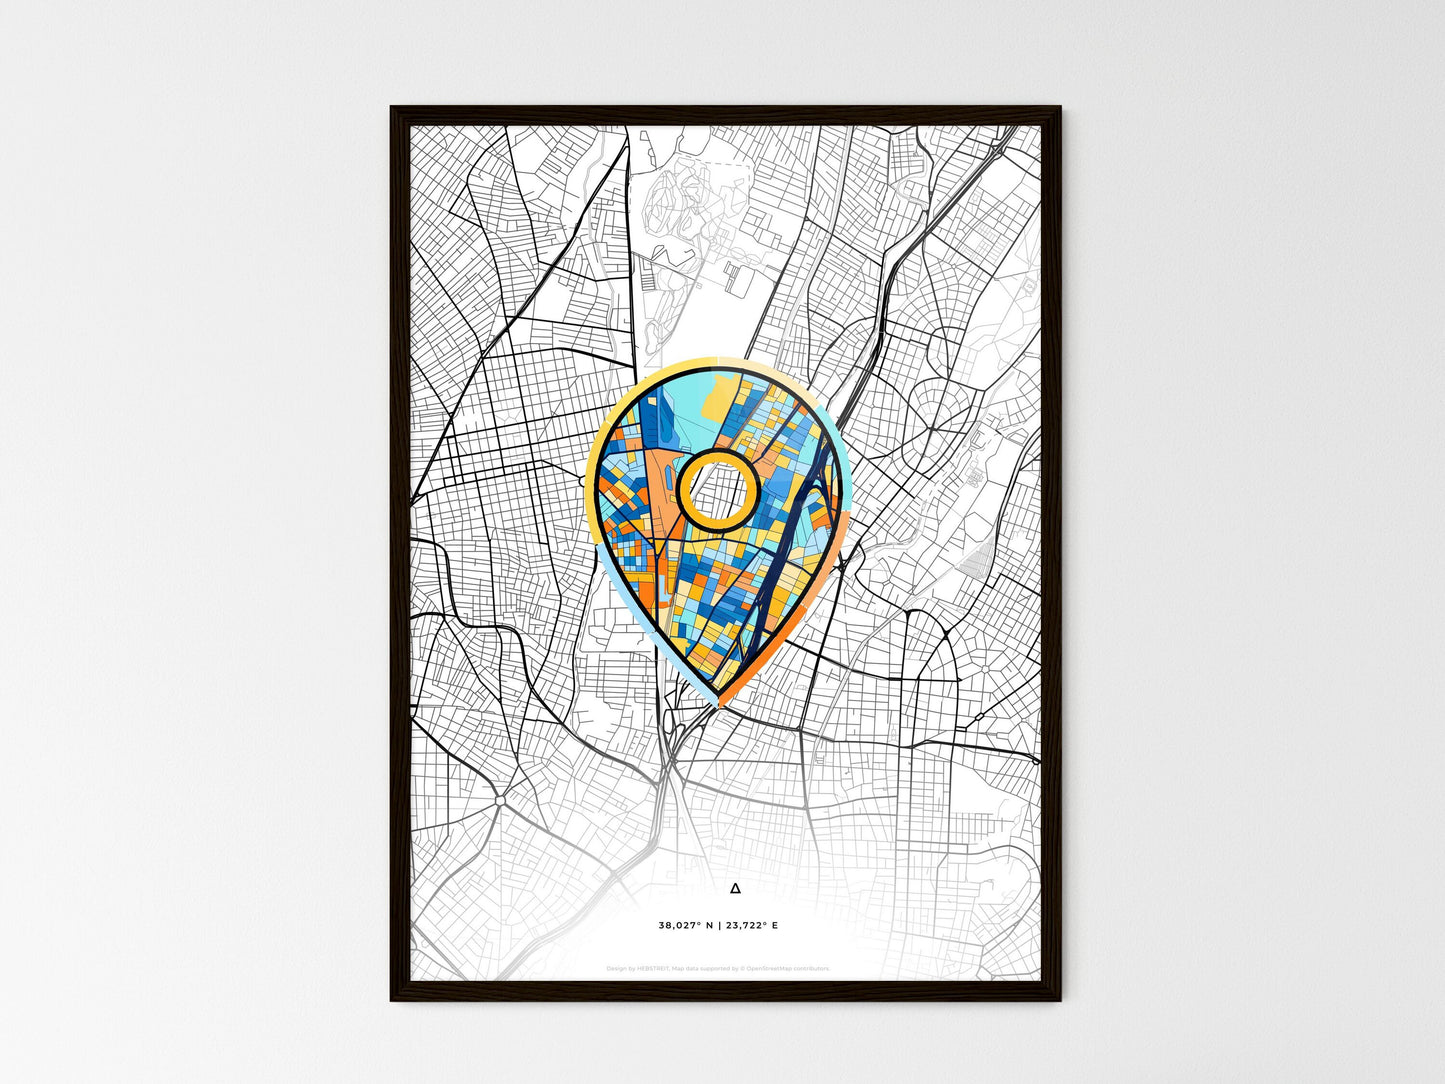 AGIOI ANARGYROI GREECE minimal art map with a colorful icon. Where it all began, Couple map gift. Style 1